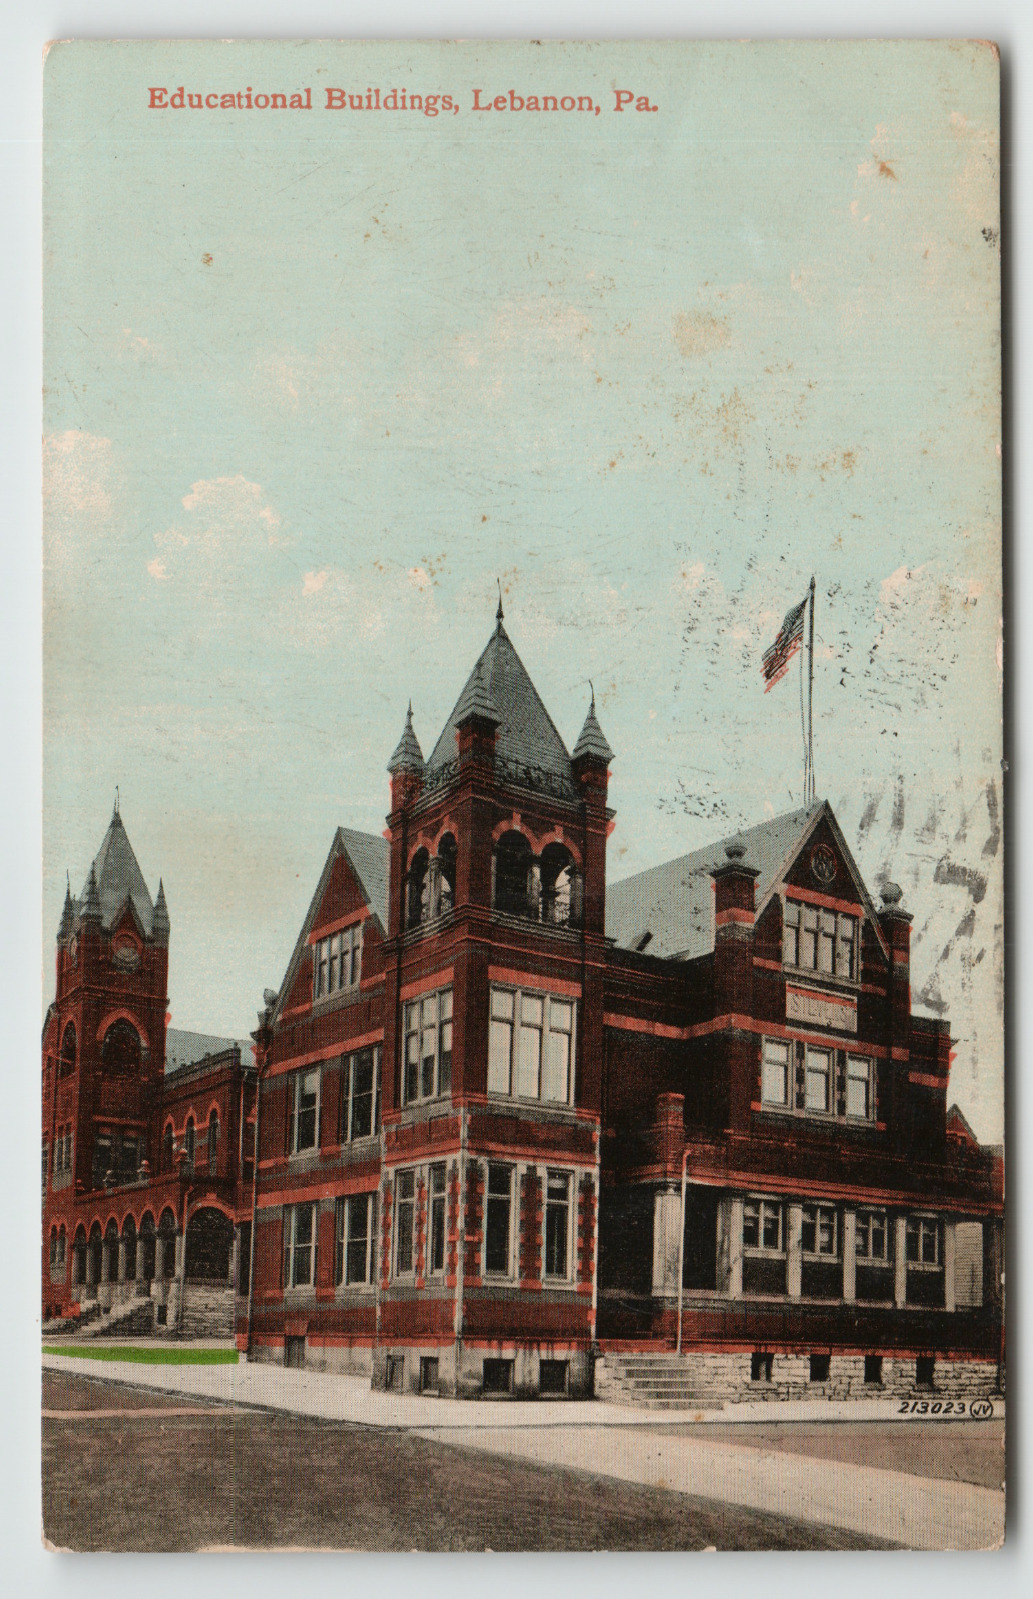 Postcard 1912 Stevens Elementary School on Tenth & Willow Sts. in Lebanon, PA